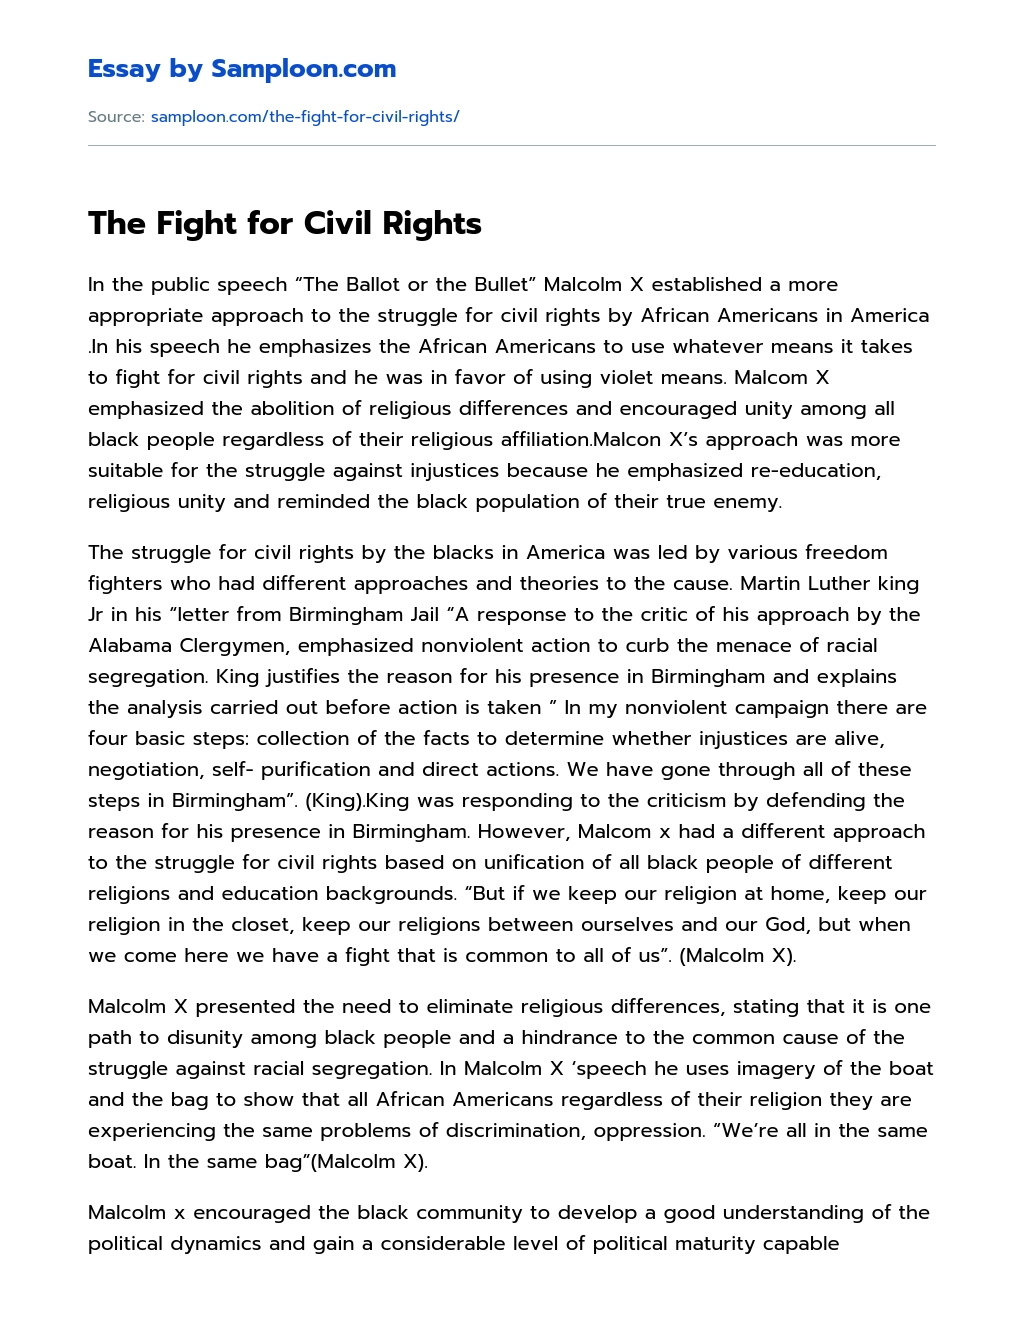 The Fight for Civil Rights essay